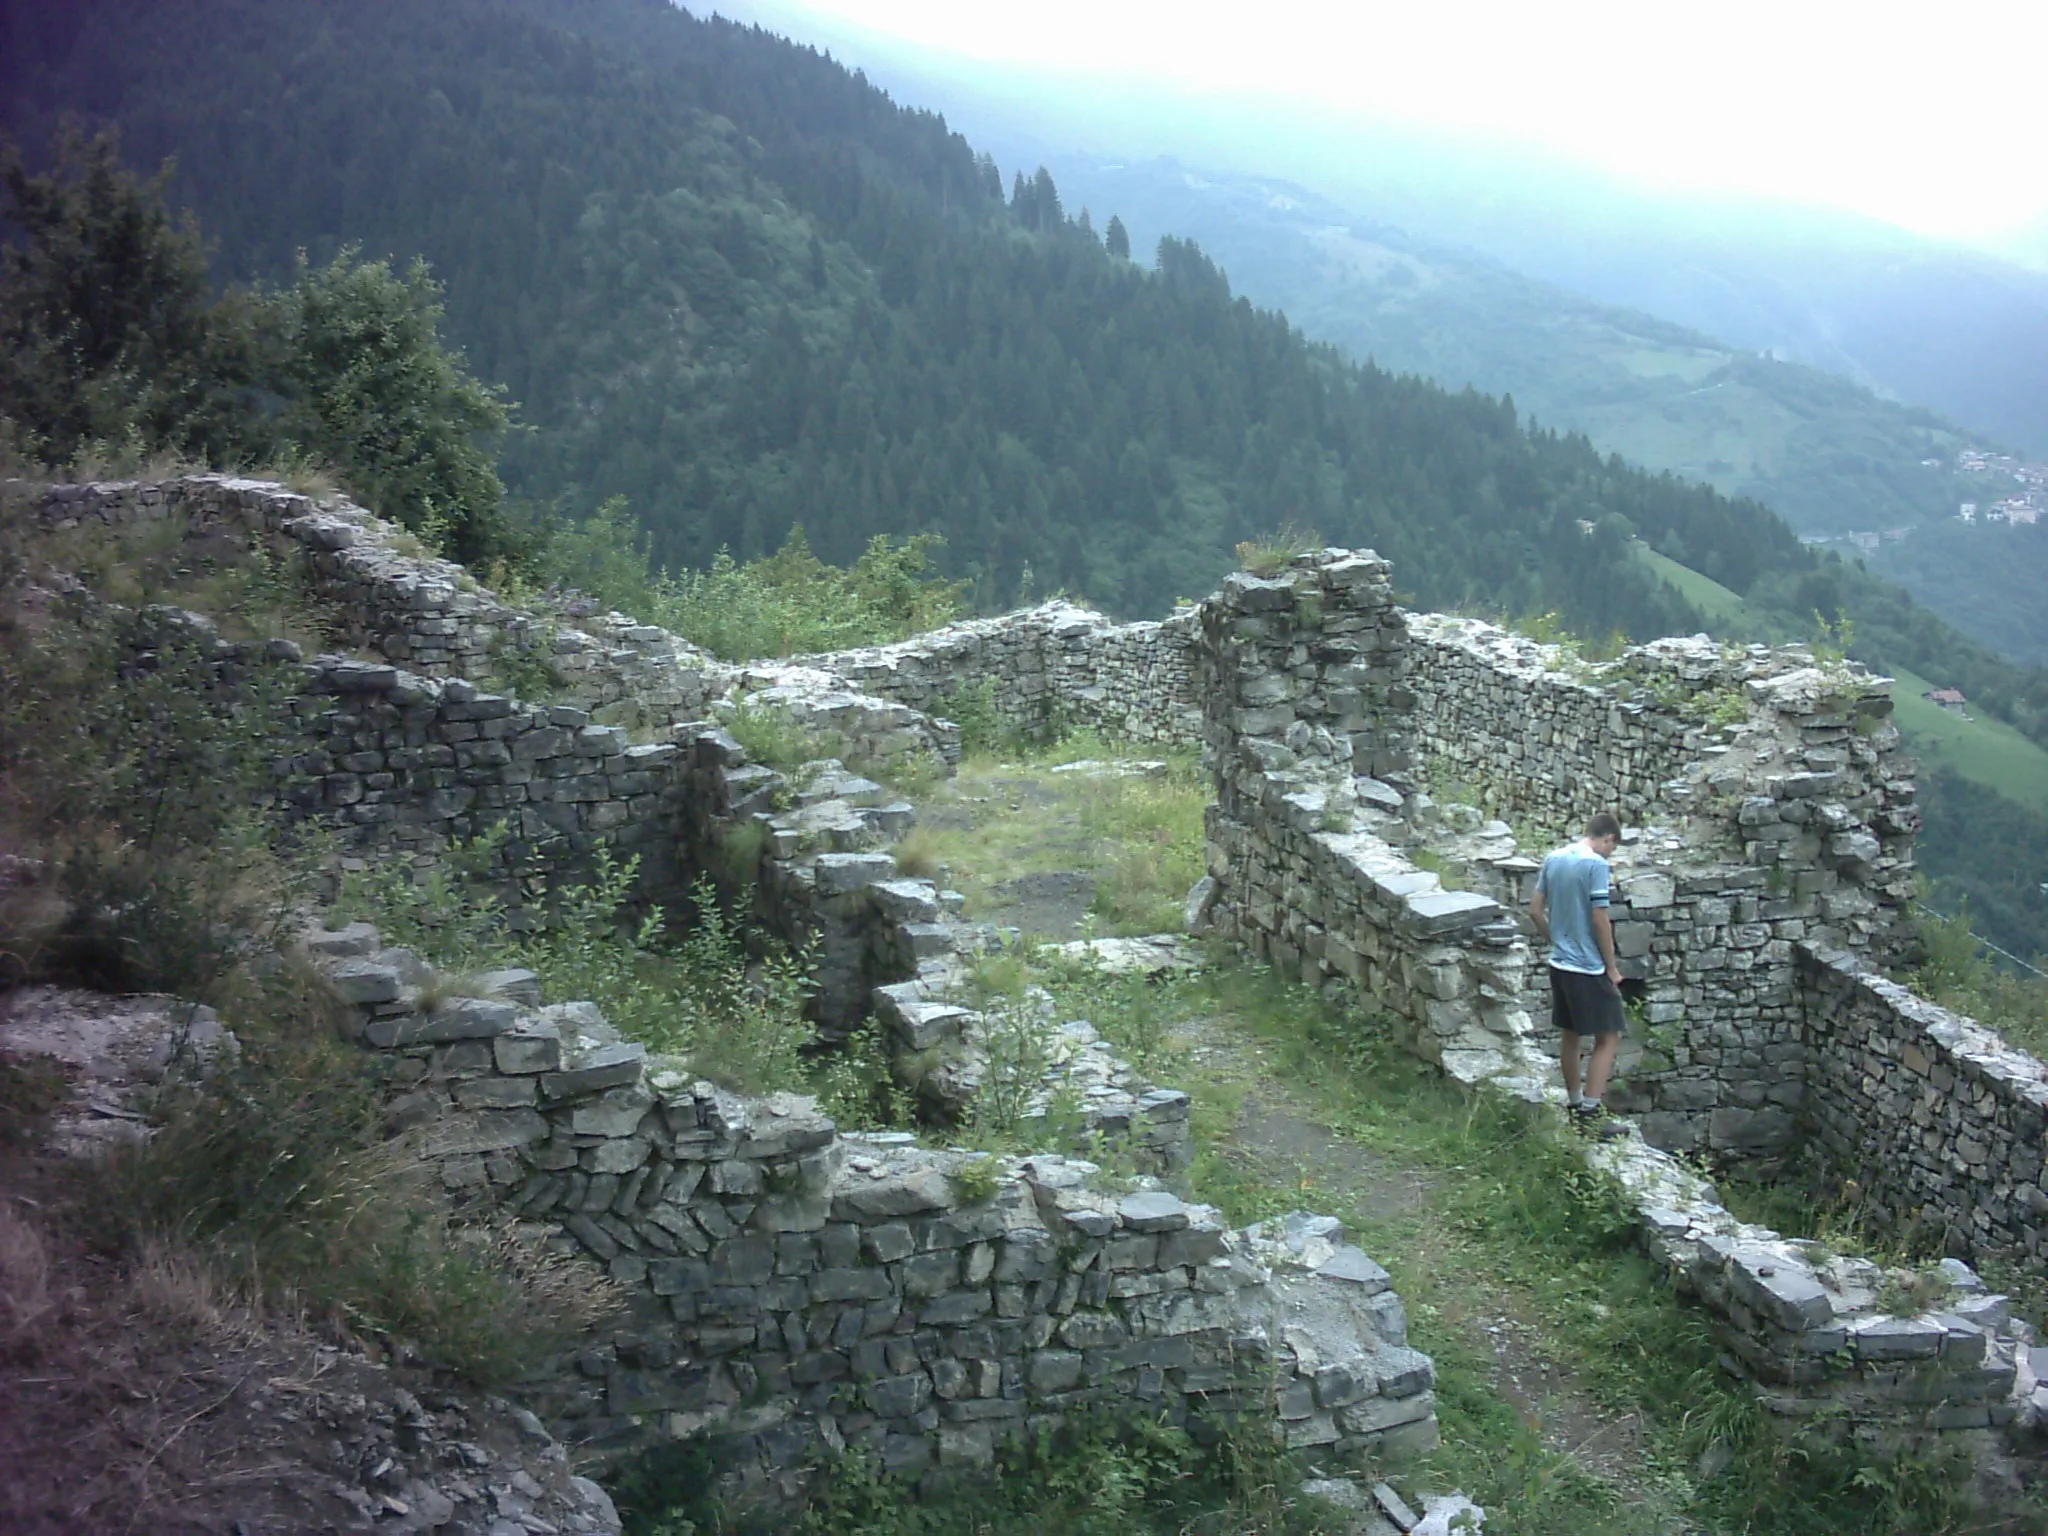 Photo showing: The desolate ruins of the ancient castle of Lozio, in the en:Val Camonica, on the top of a steep hill some 1200 metres above sea level. The castle was property of a powerful guelph family that ruled above the valley up to 15th century, Nobili. This castle was the only one belonging to Nobili family that wasn't destroyed.